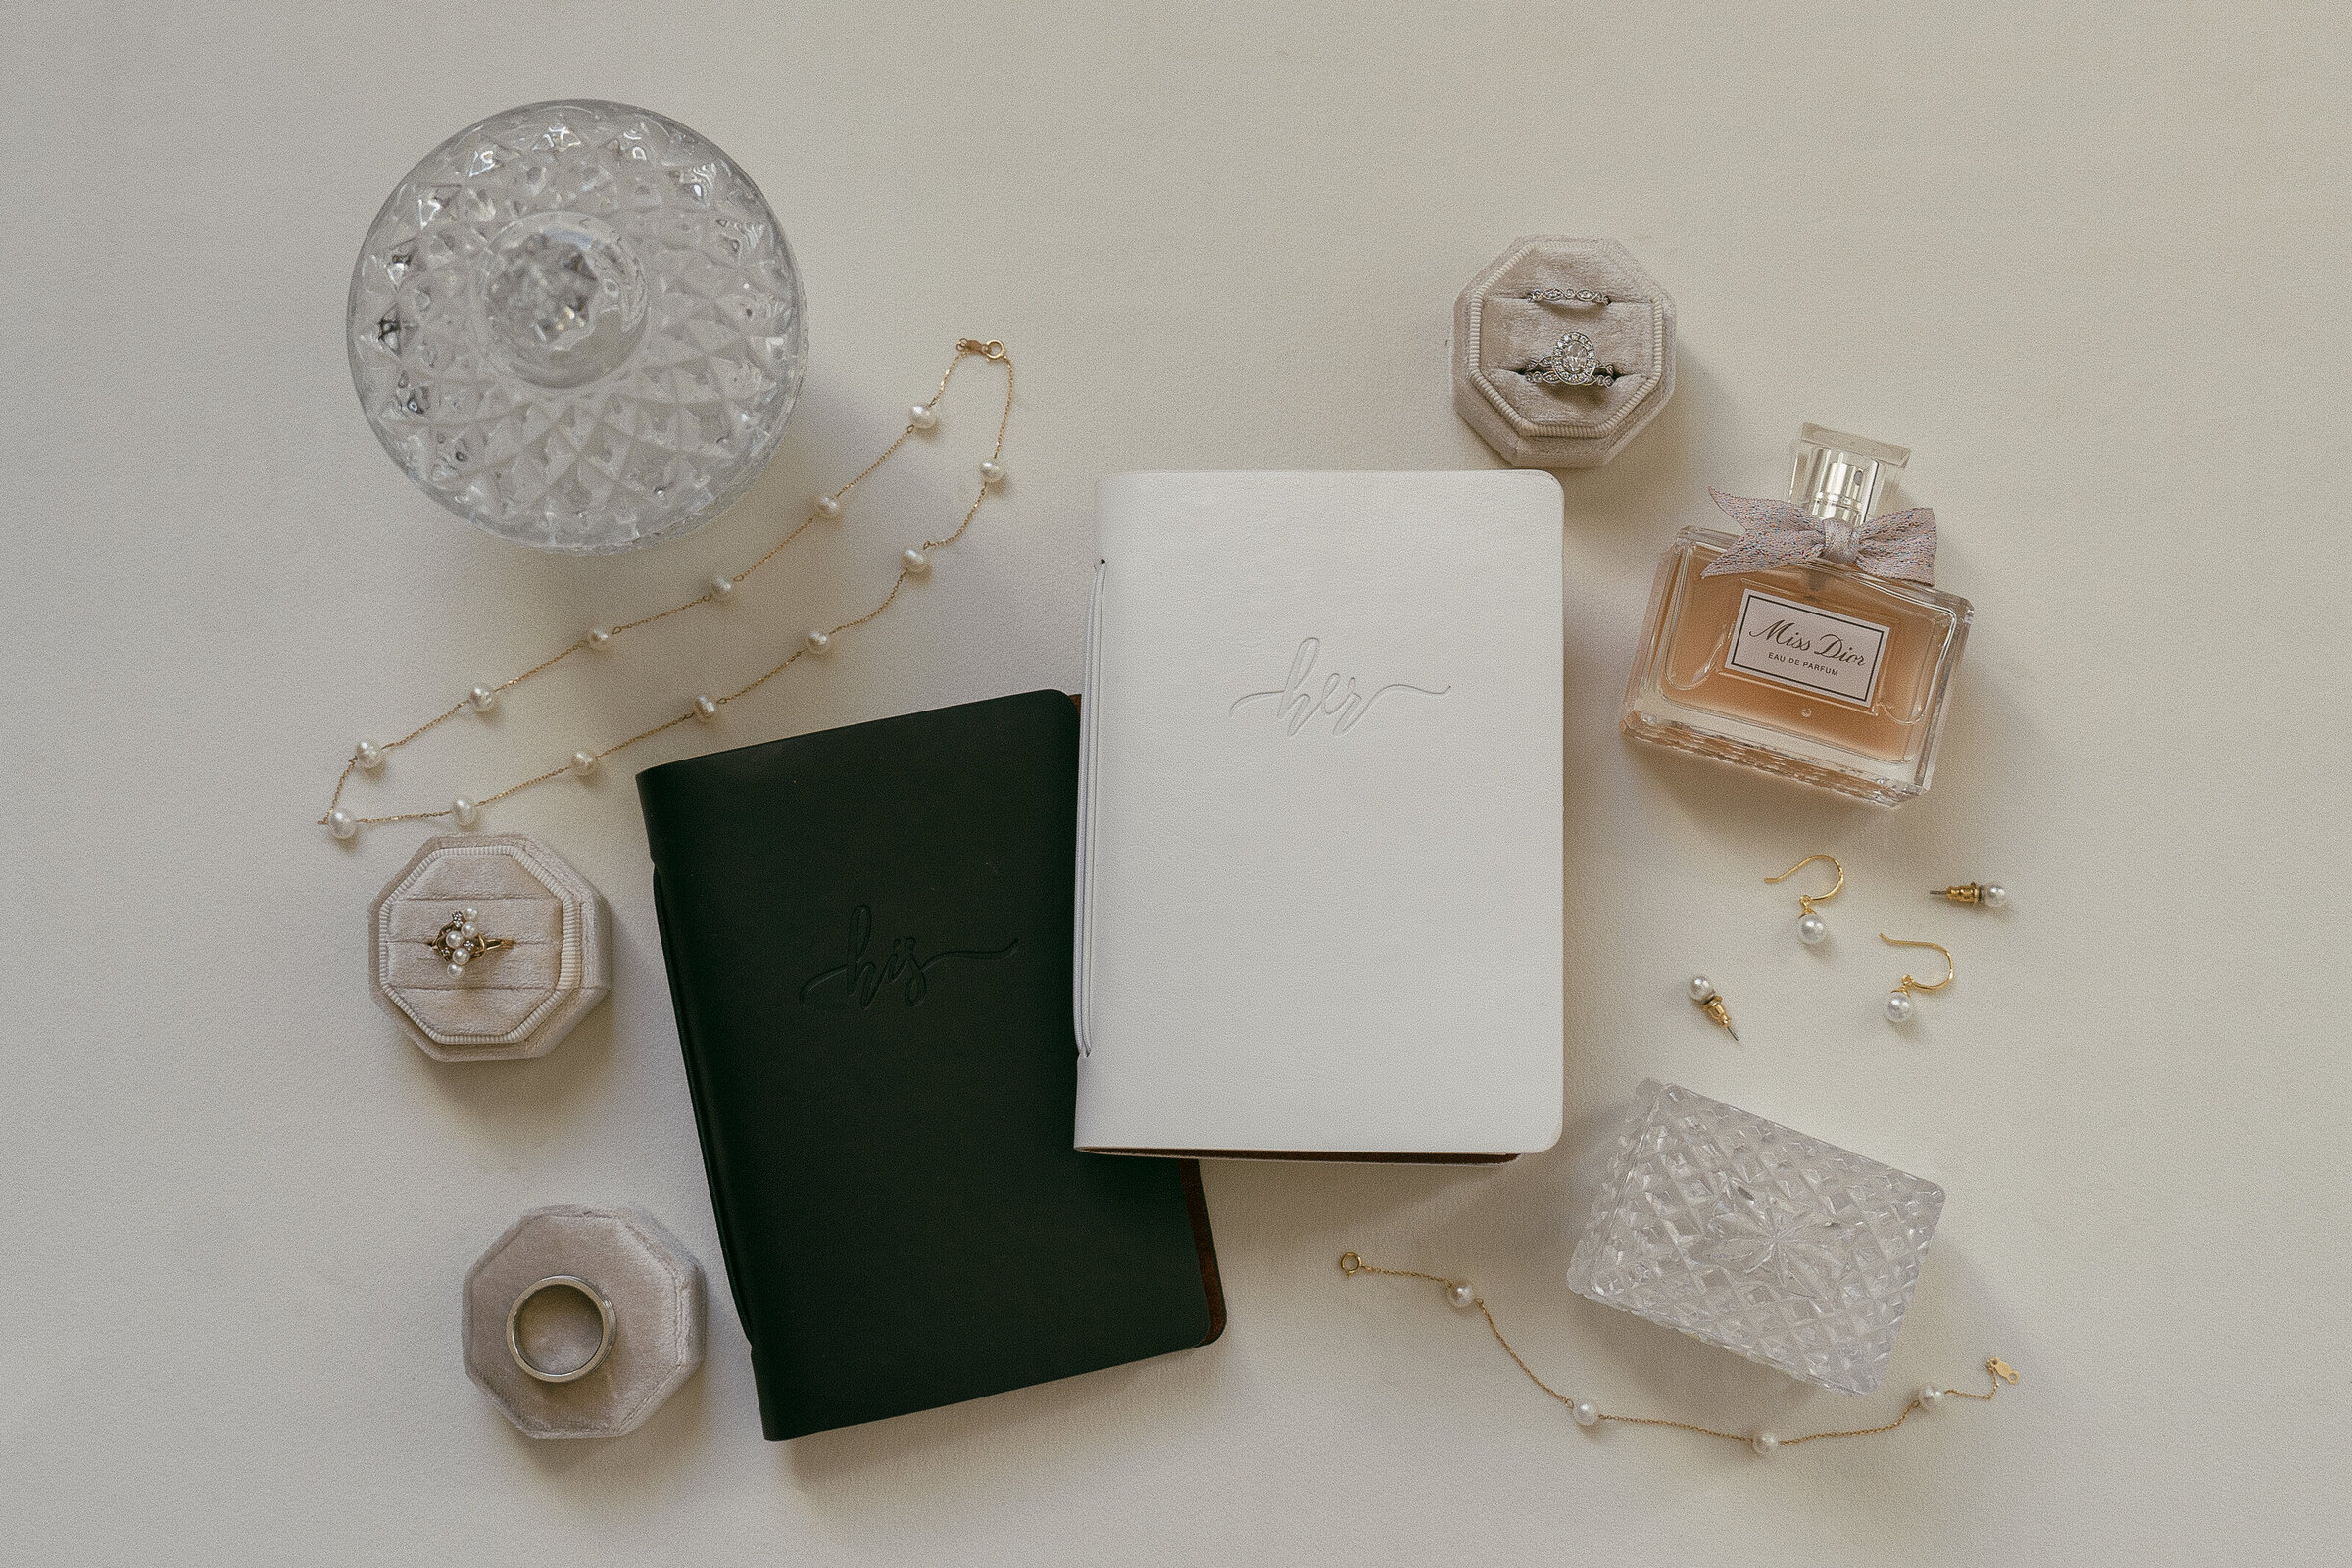 Wedding flat lay with invitations, perfume, and bridal accessories.